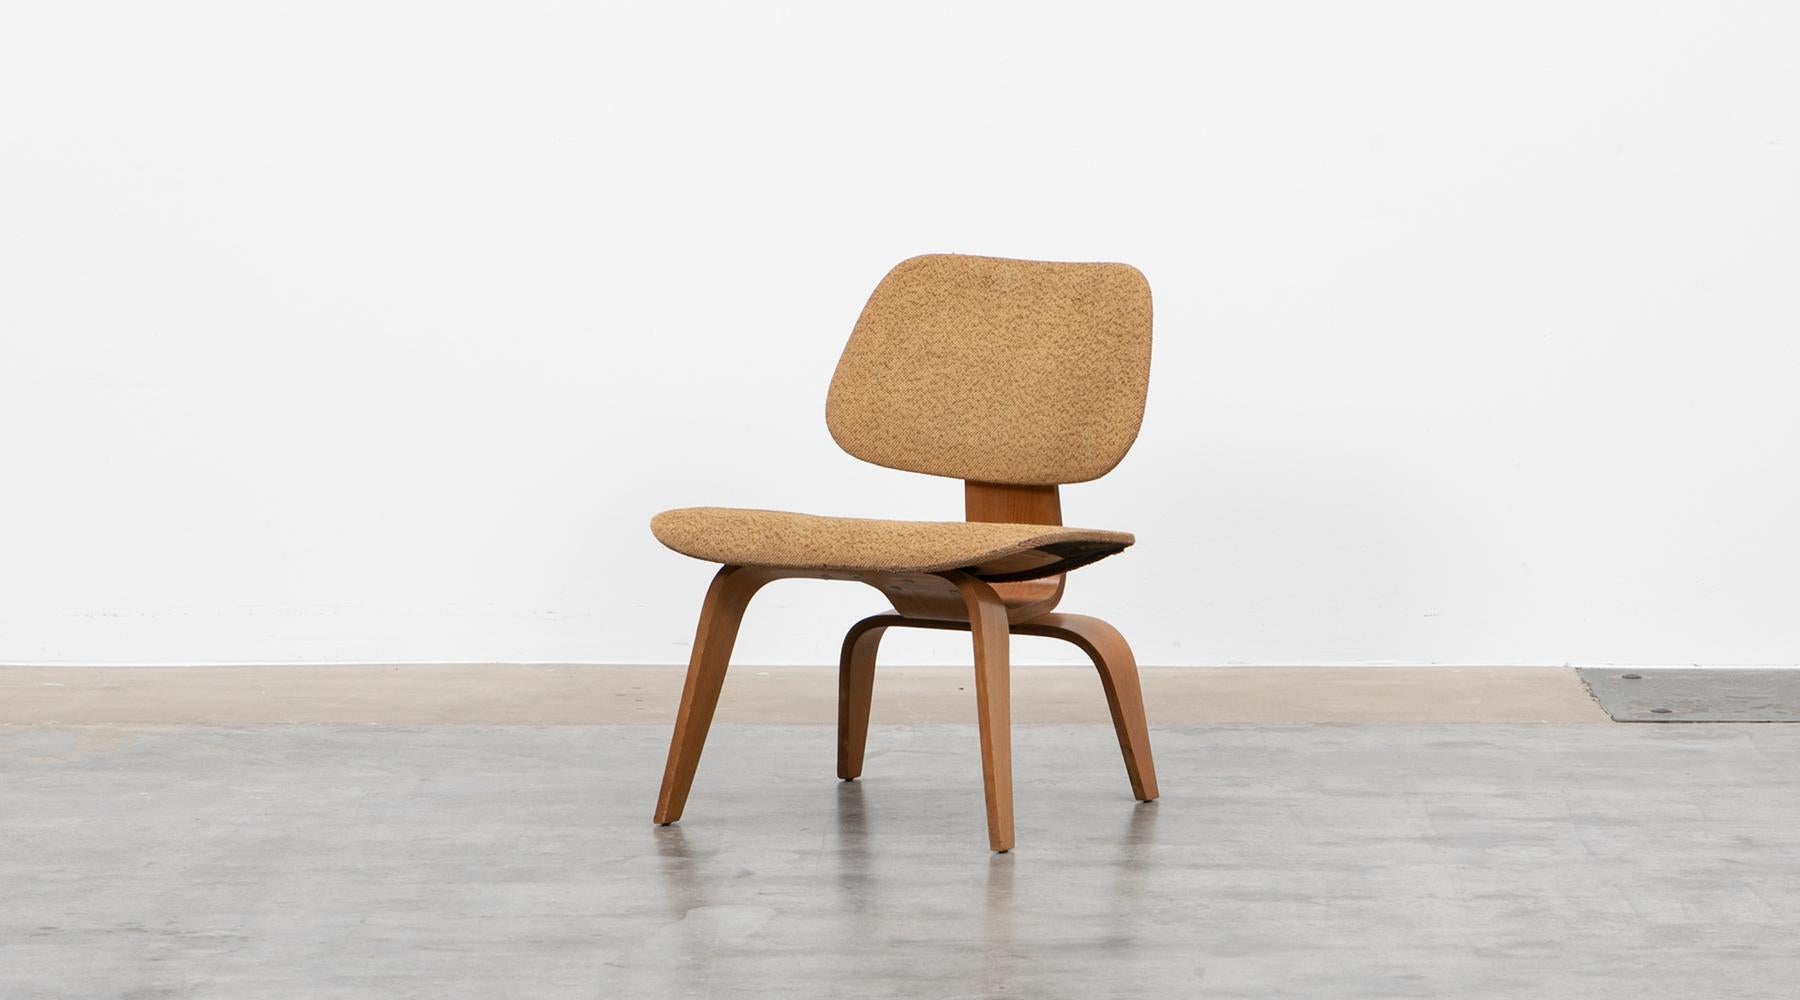 LCW Chair, plywood in ash, original fabric, Charles & Ray Eames, USA, 1948.

Early example of a LCW chair by famous Charles & Ray Eames. The unusual organic shape of this object shows Charles & Ray Eames innovative use of lumber-core plywood.